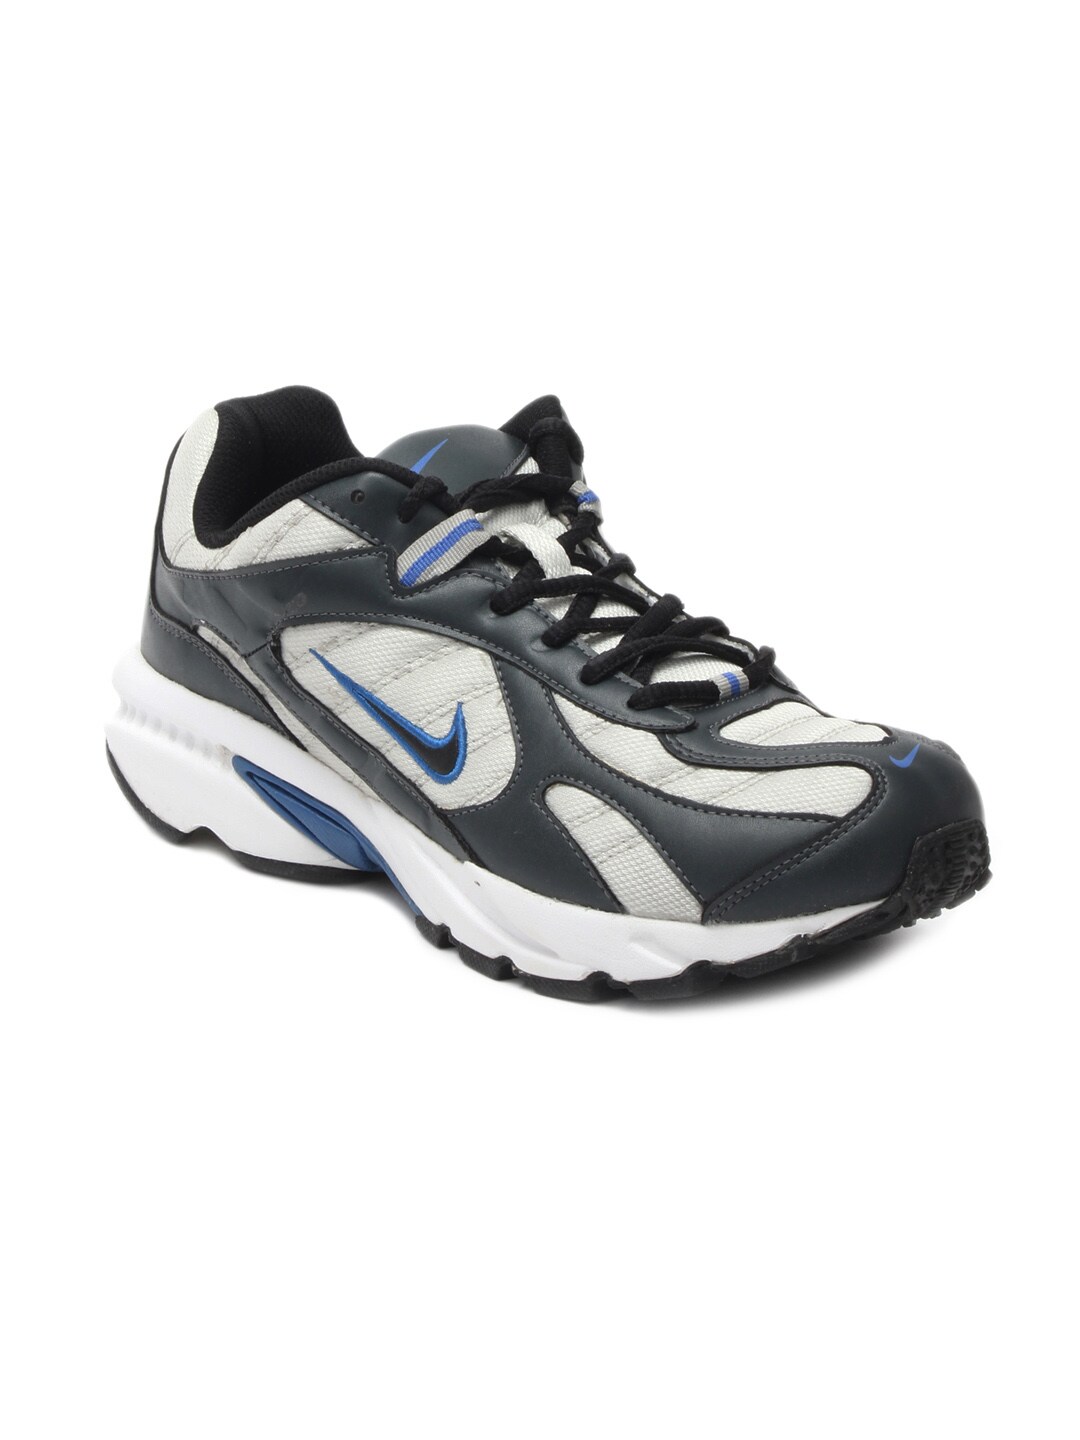 Nike Men Silver and Black Sports Shoes